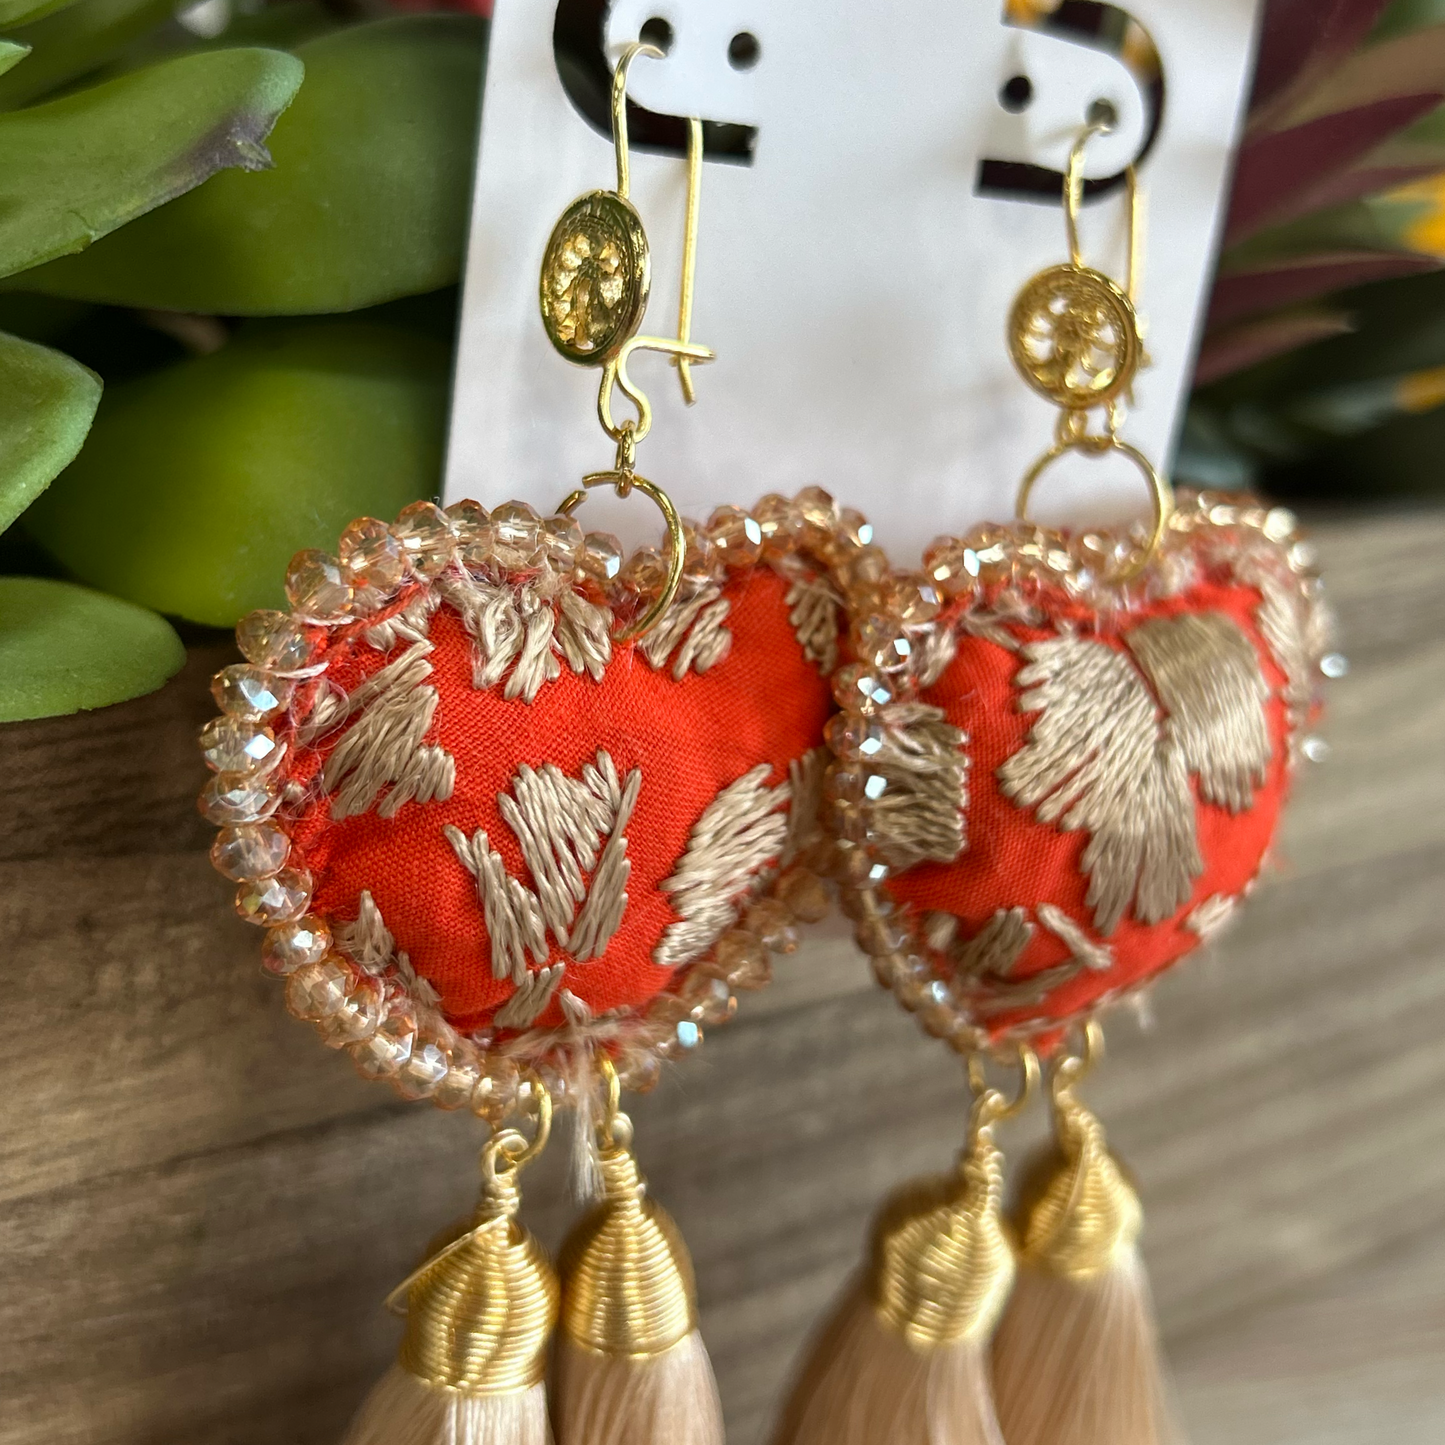 San Antonino Mexican Embroidered Heart Earrings - Orange Gold